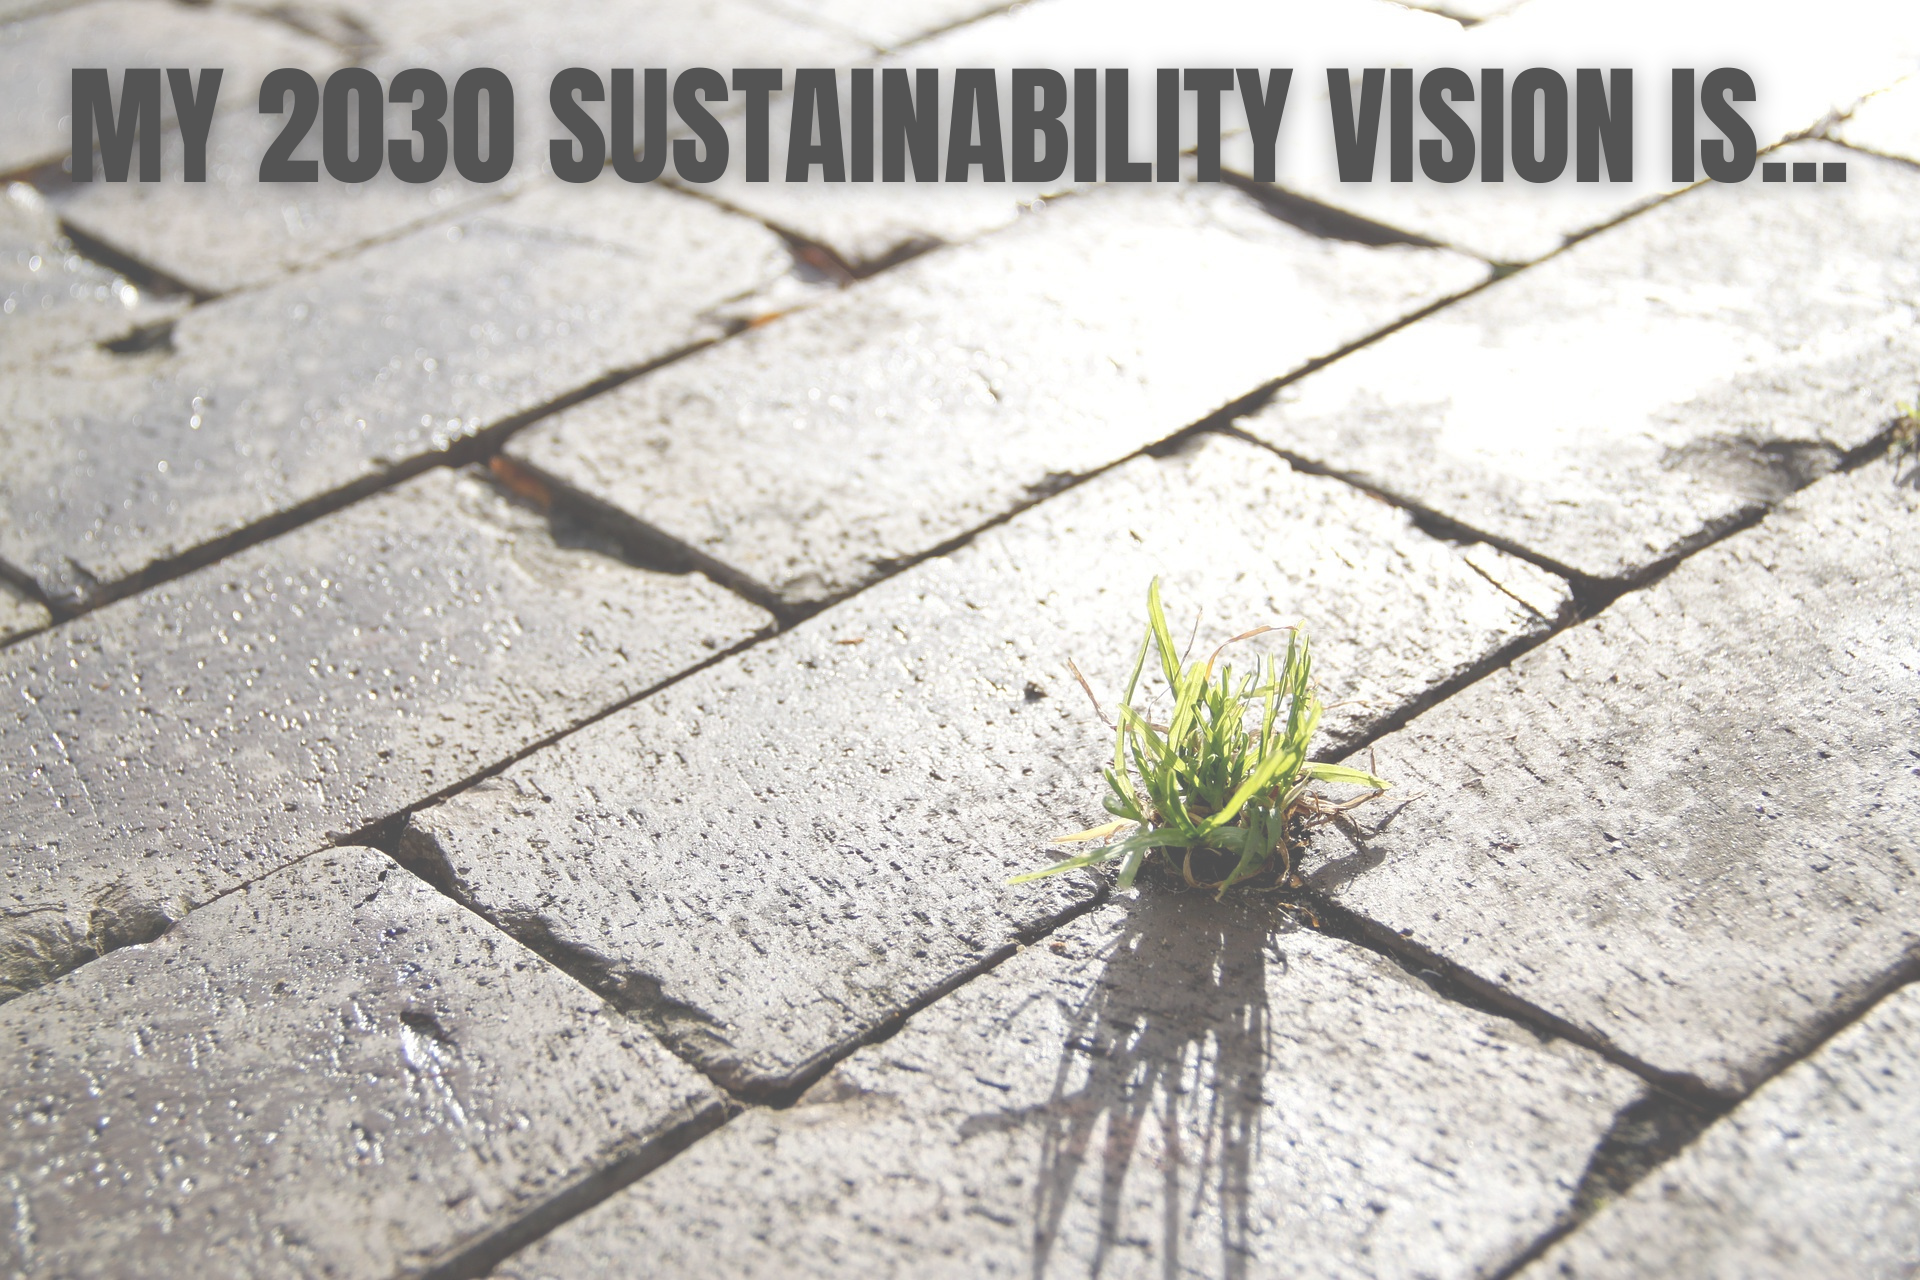 What is your Sustainable Vision for 2030?